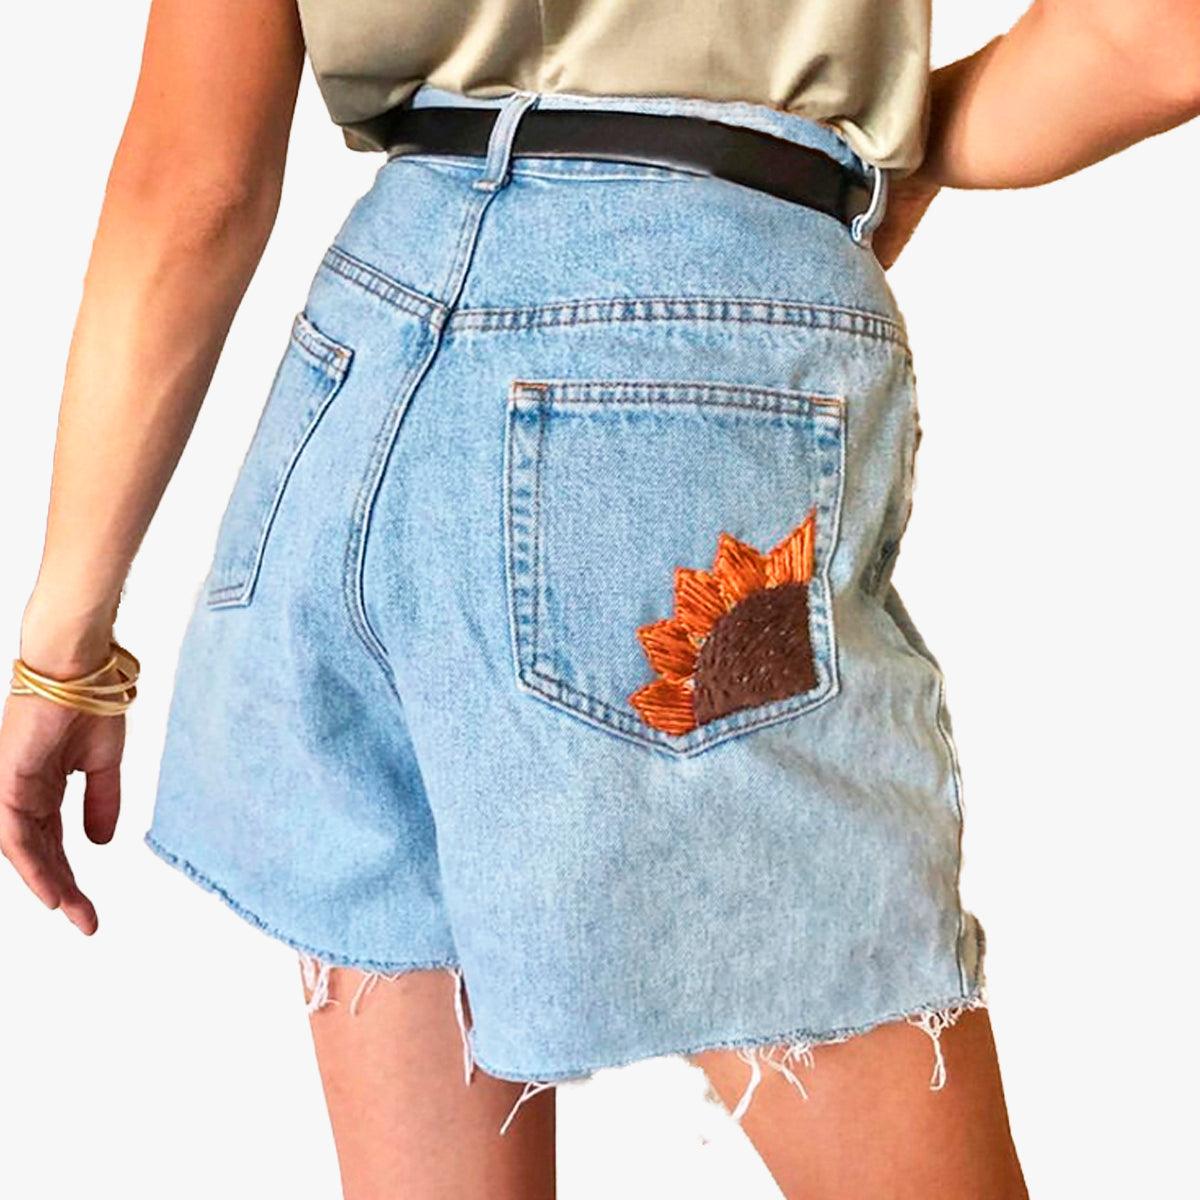 Sunflower Embroidery Light Blue Shorts - Aesthetic Clothes Shop